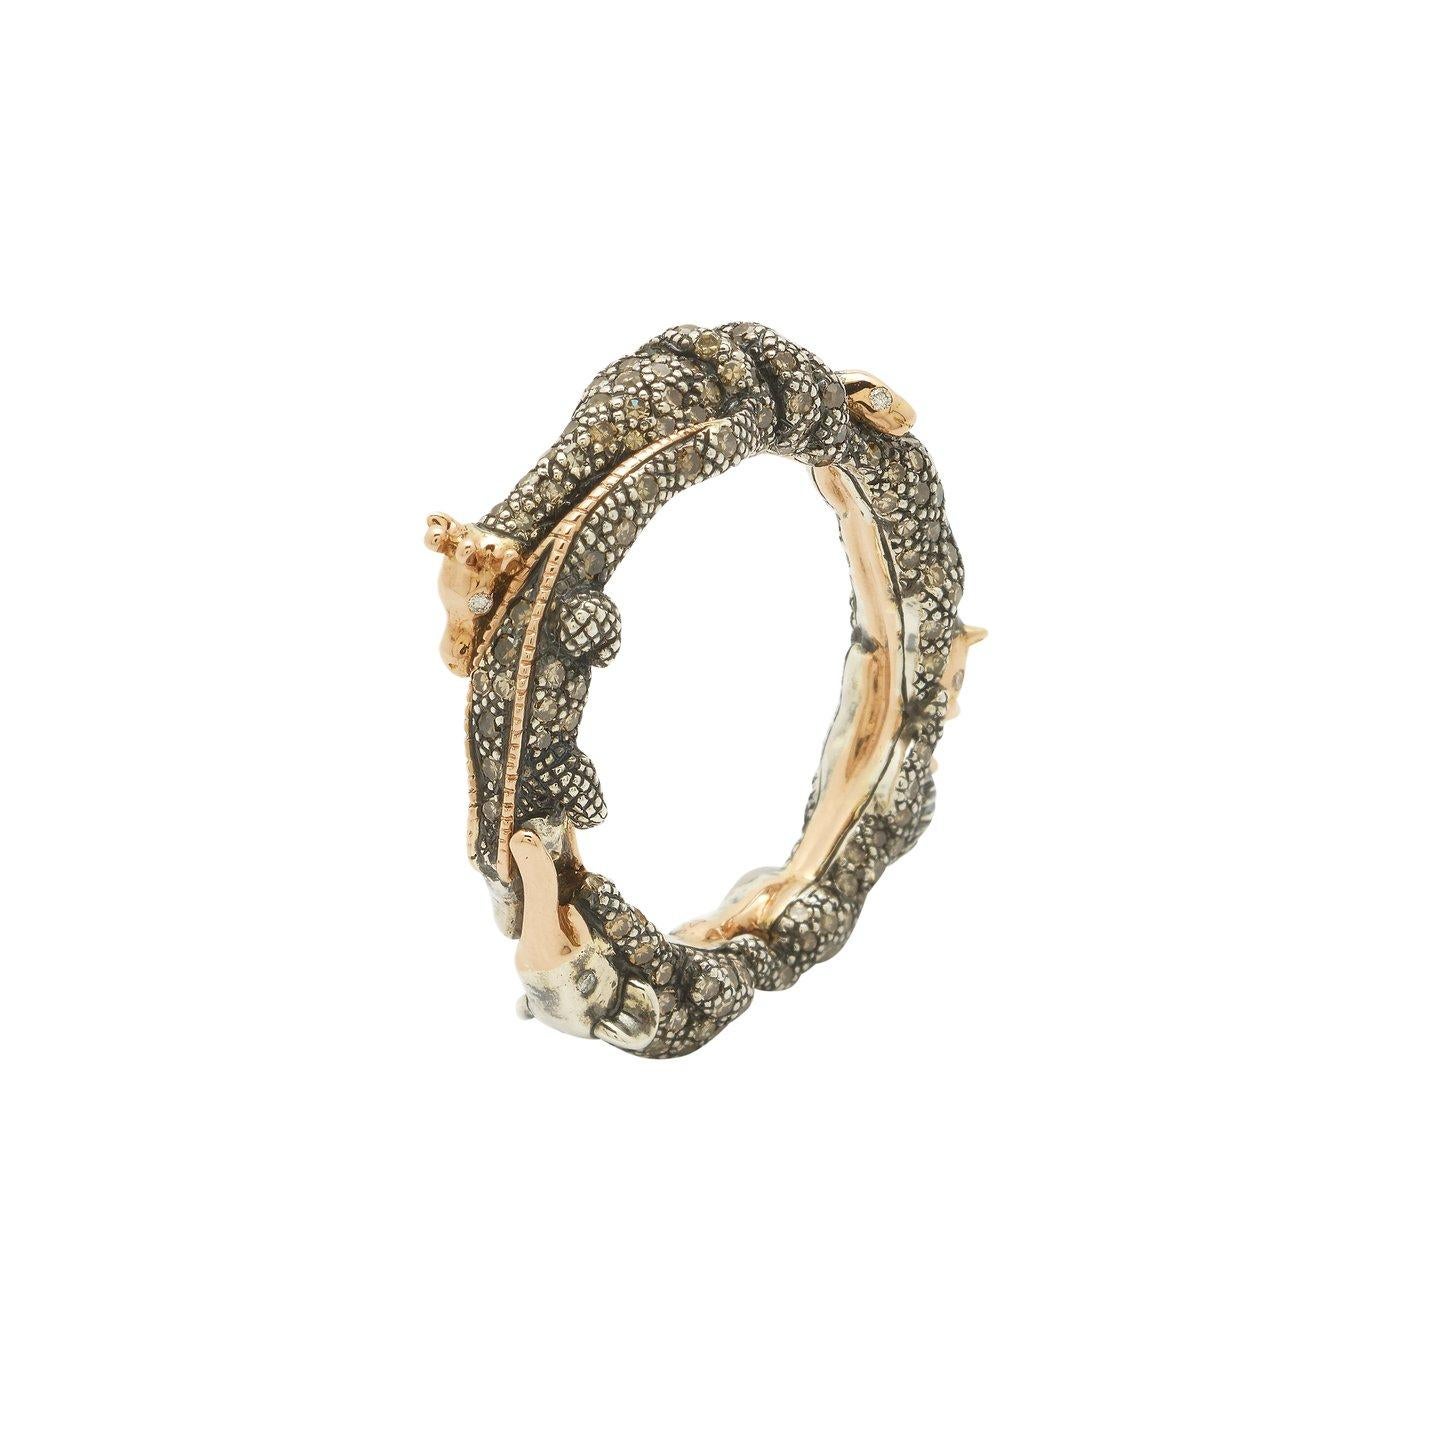 An elegant circle of life, the Animal Eternity Ring is fashioned as an intertwined knot of animals, among them a snake, a lion, and a ram. Designed in 18k recycled rose gold and sterling silver, these finely crafted animals have twinkling white